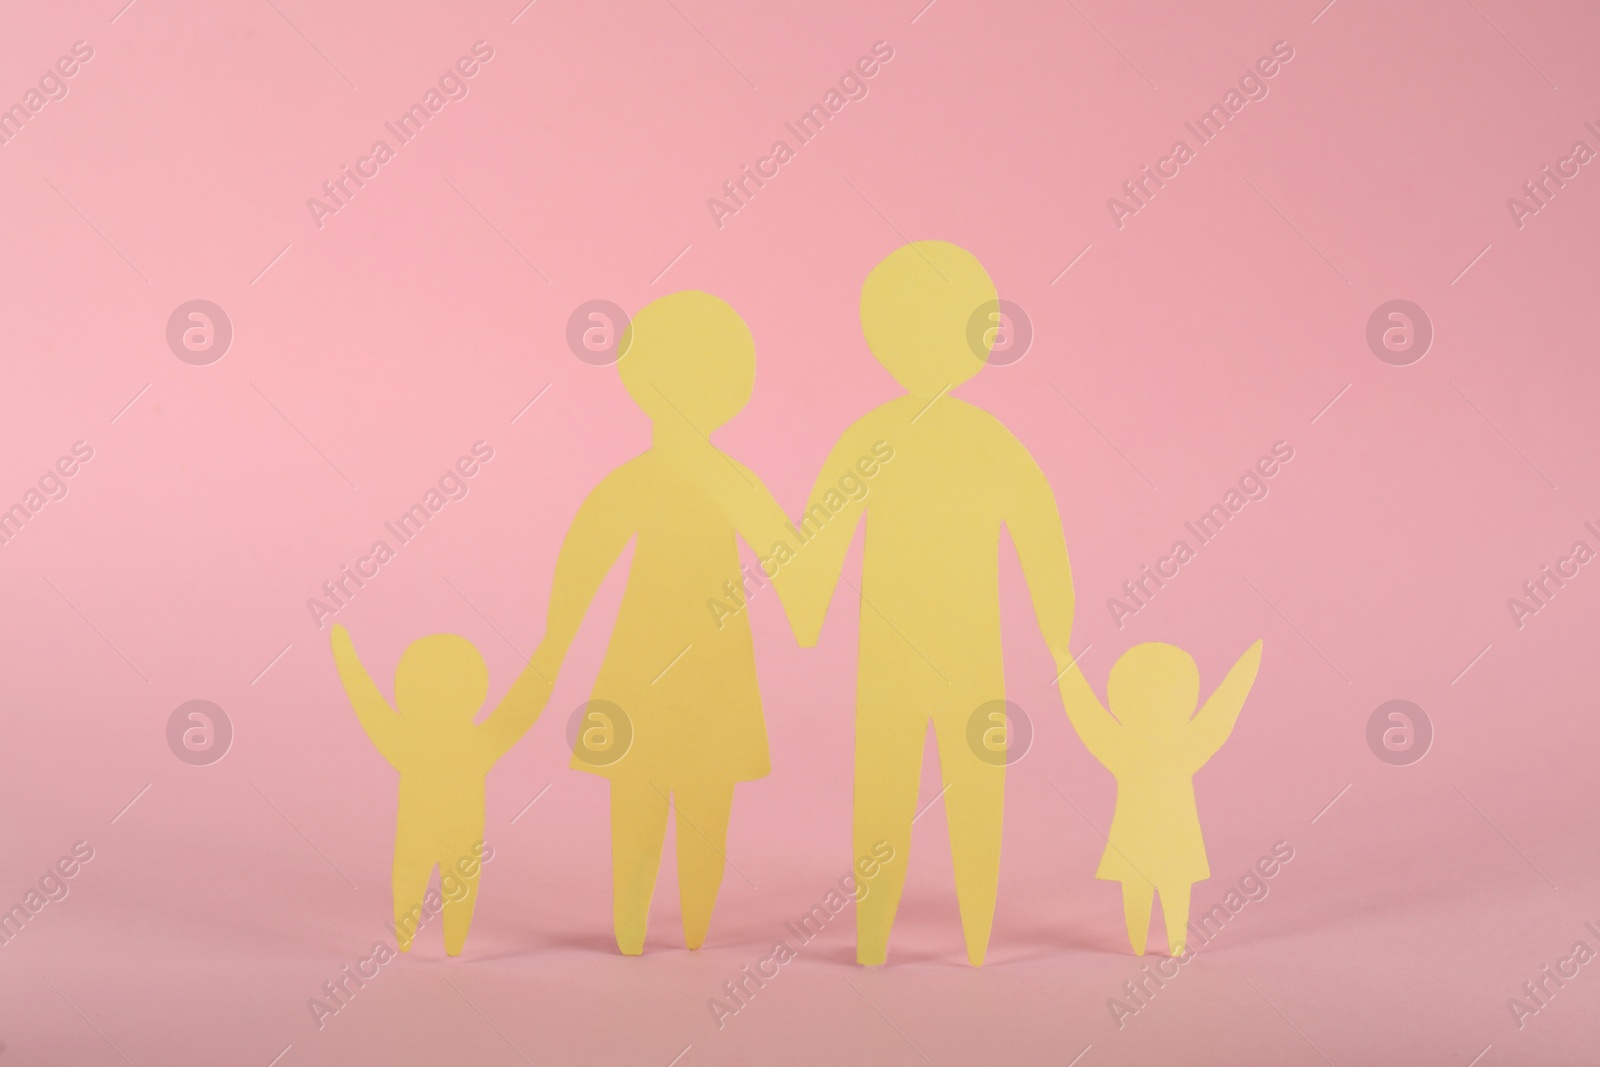 Photo of Paper family figure on pink background. Child adoption concept